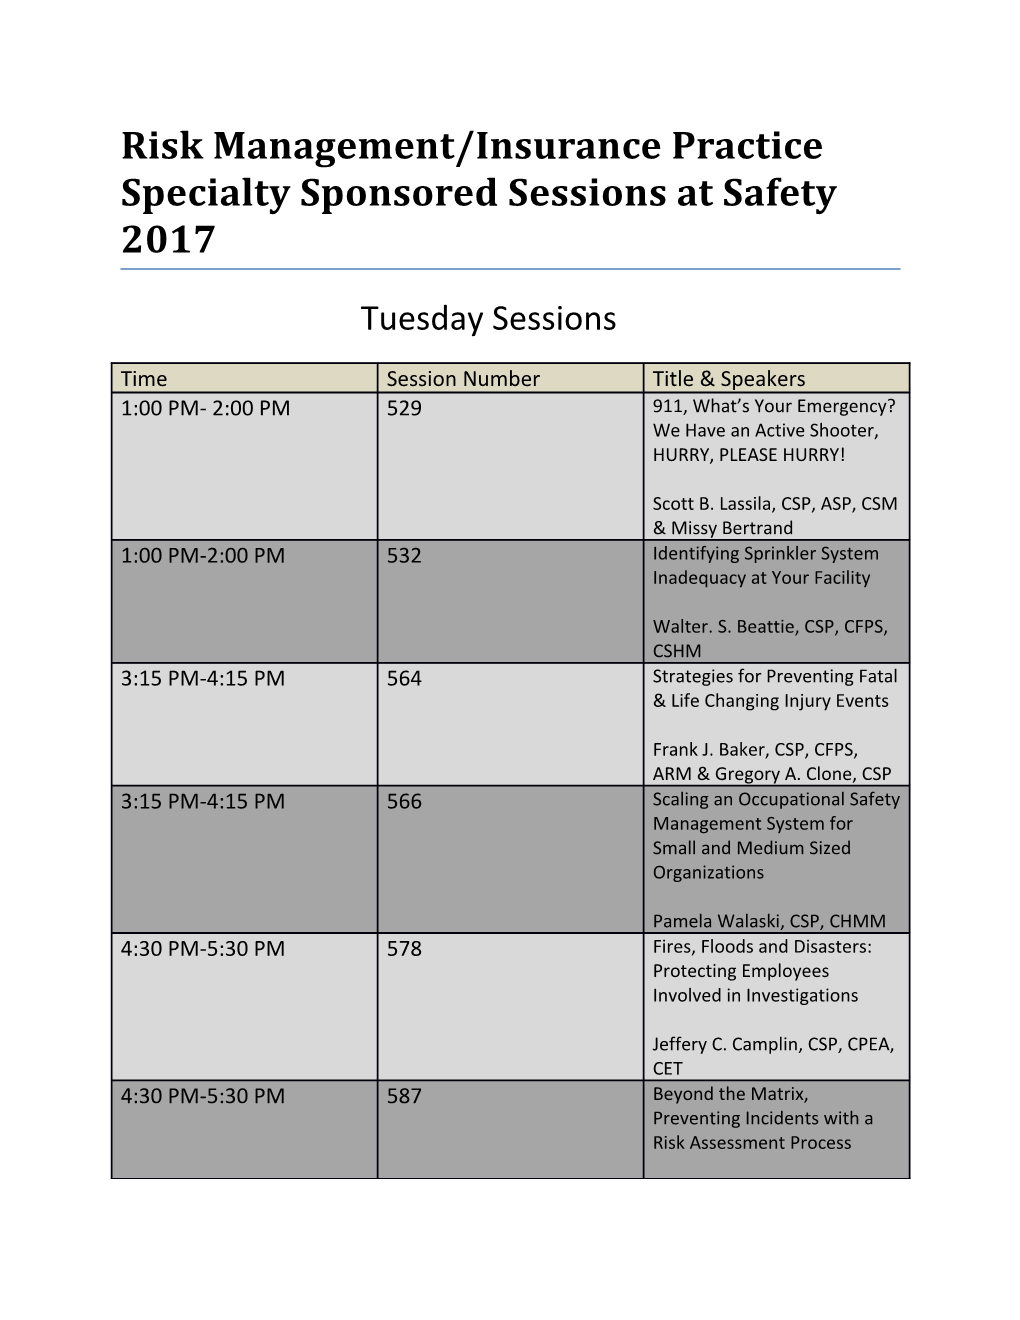 Risk Management/Insurance Practice Specialty Sponsored Sessions at Safety 2017